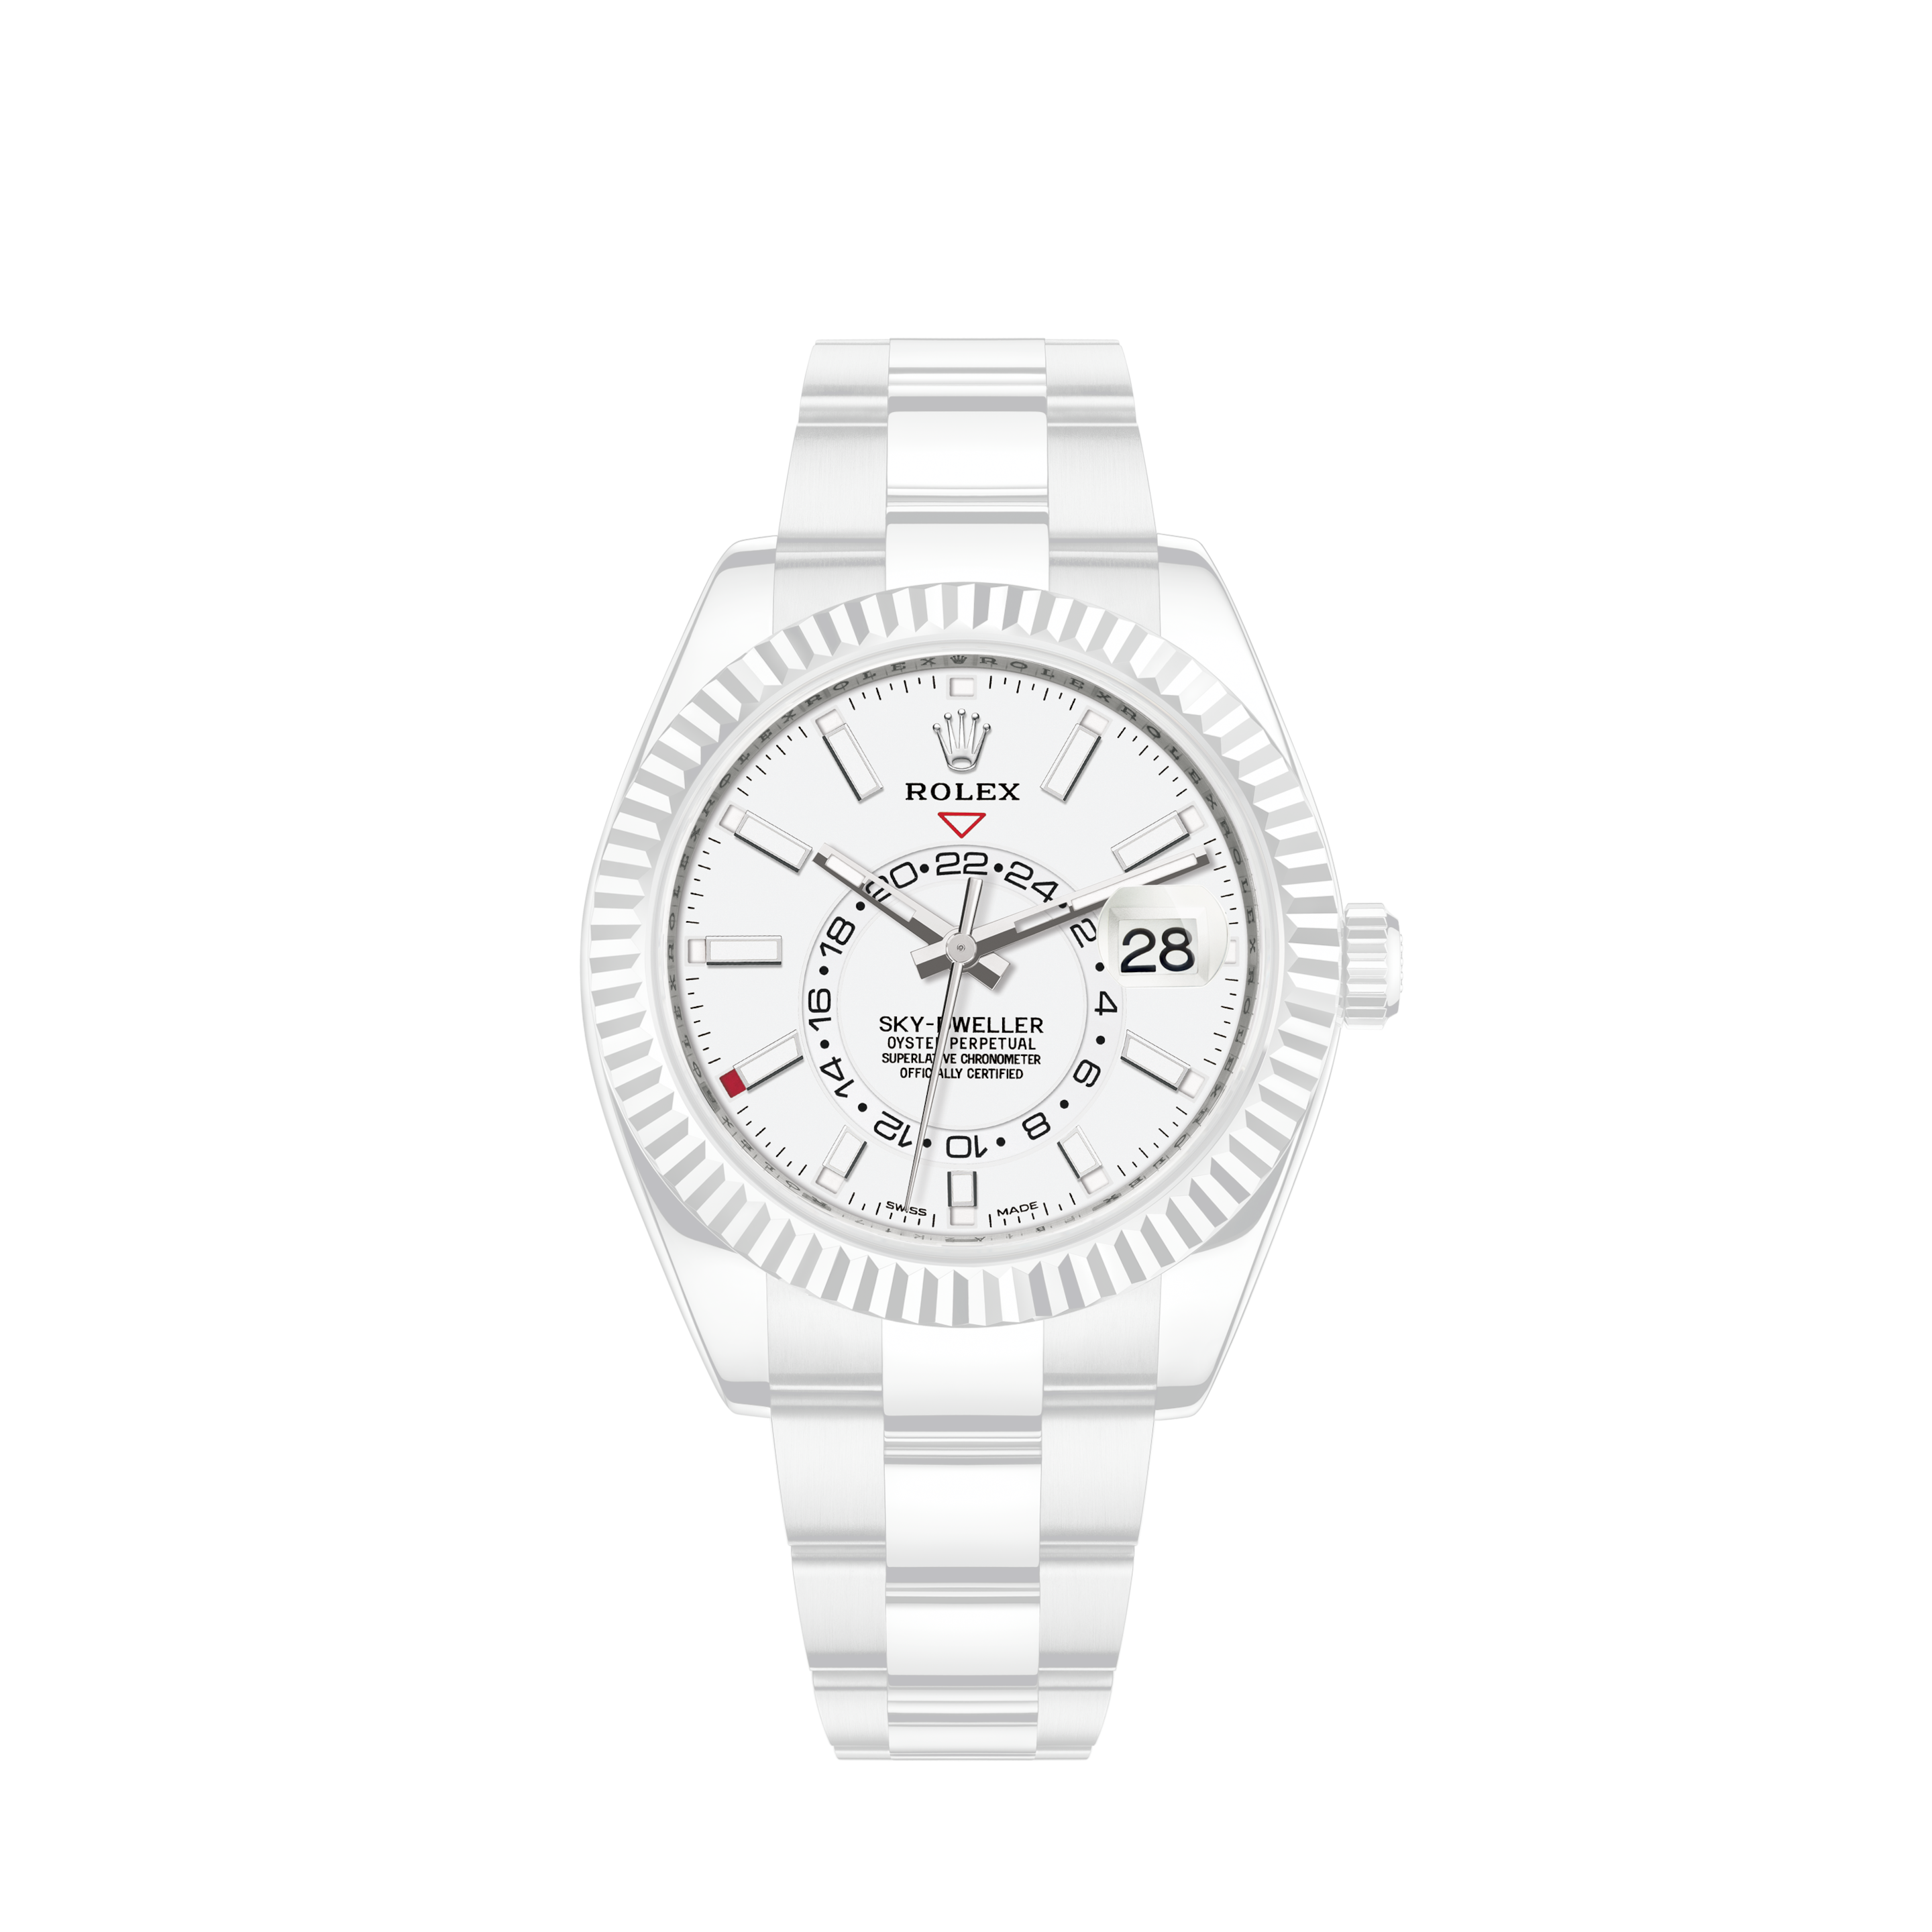 Rolex Oyster Perpetual Datejust White 16234 1991 (Full Set)Rolex 26mm Datejust With custom Diamond bezel SS Silver Color String Diamond Accent Dial Bezel and Lugs Deployment buckle